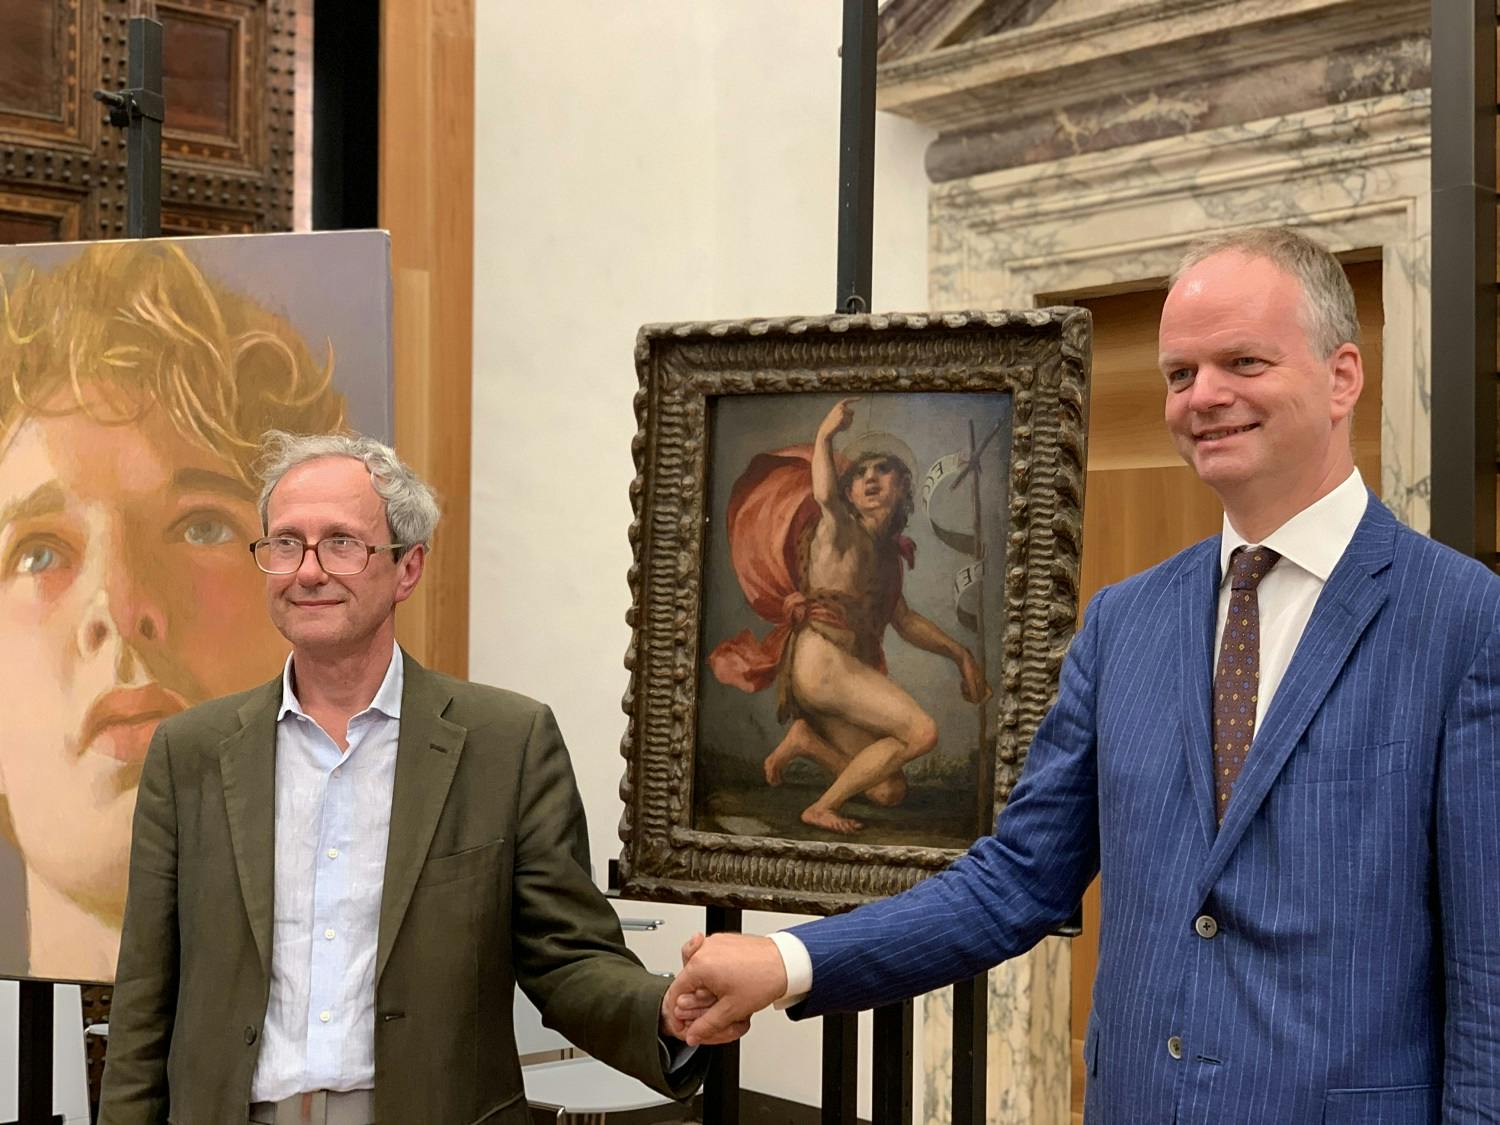 The collection of Professor Carlo del Bravo, distinguished modern art academic, has been donated to the Uffizi.